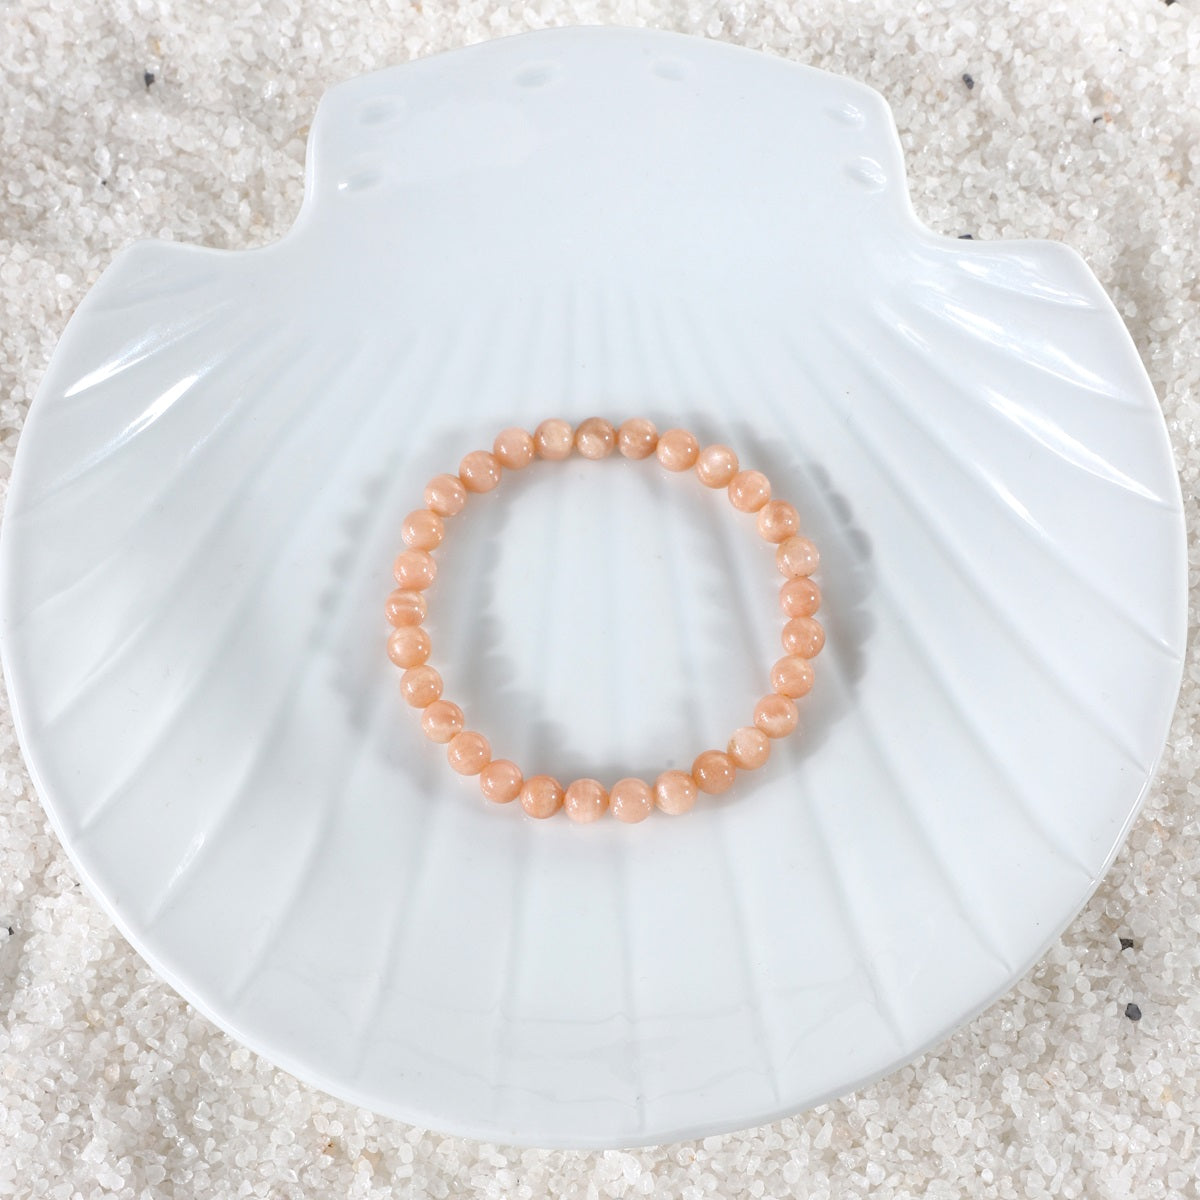 A captivating shot of the Peach Moonstone Bracelet in natural light, emphasizing its beauty and promoting a sense of emotional balance and heightened sensitivity